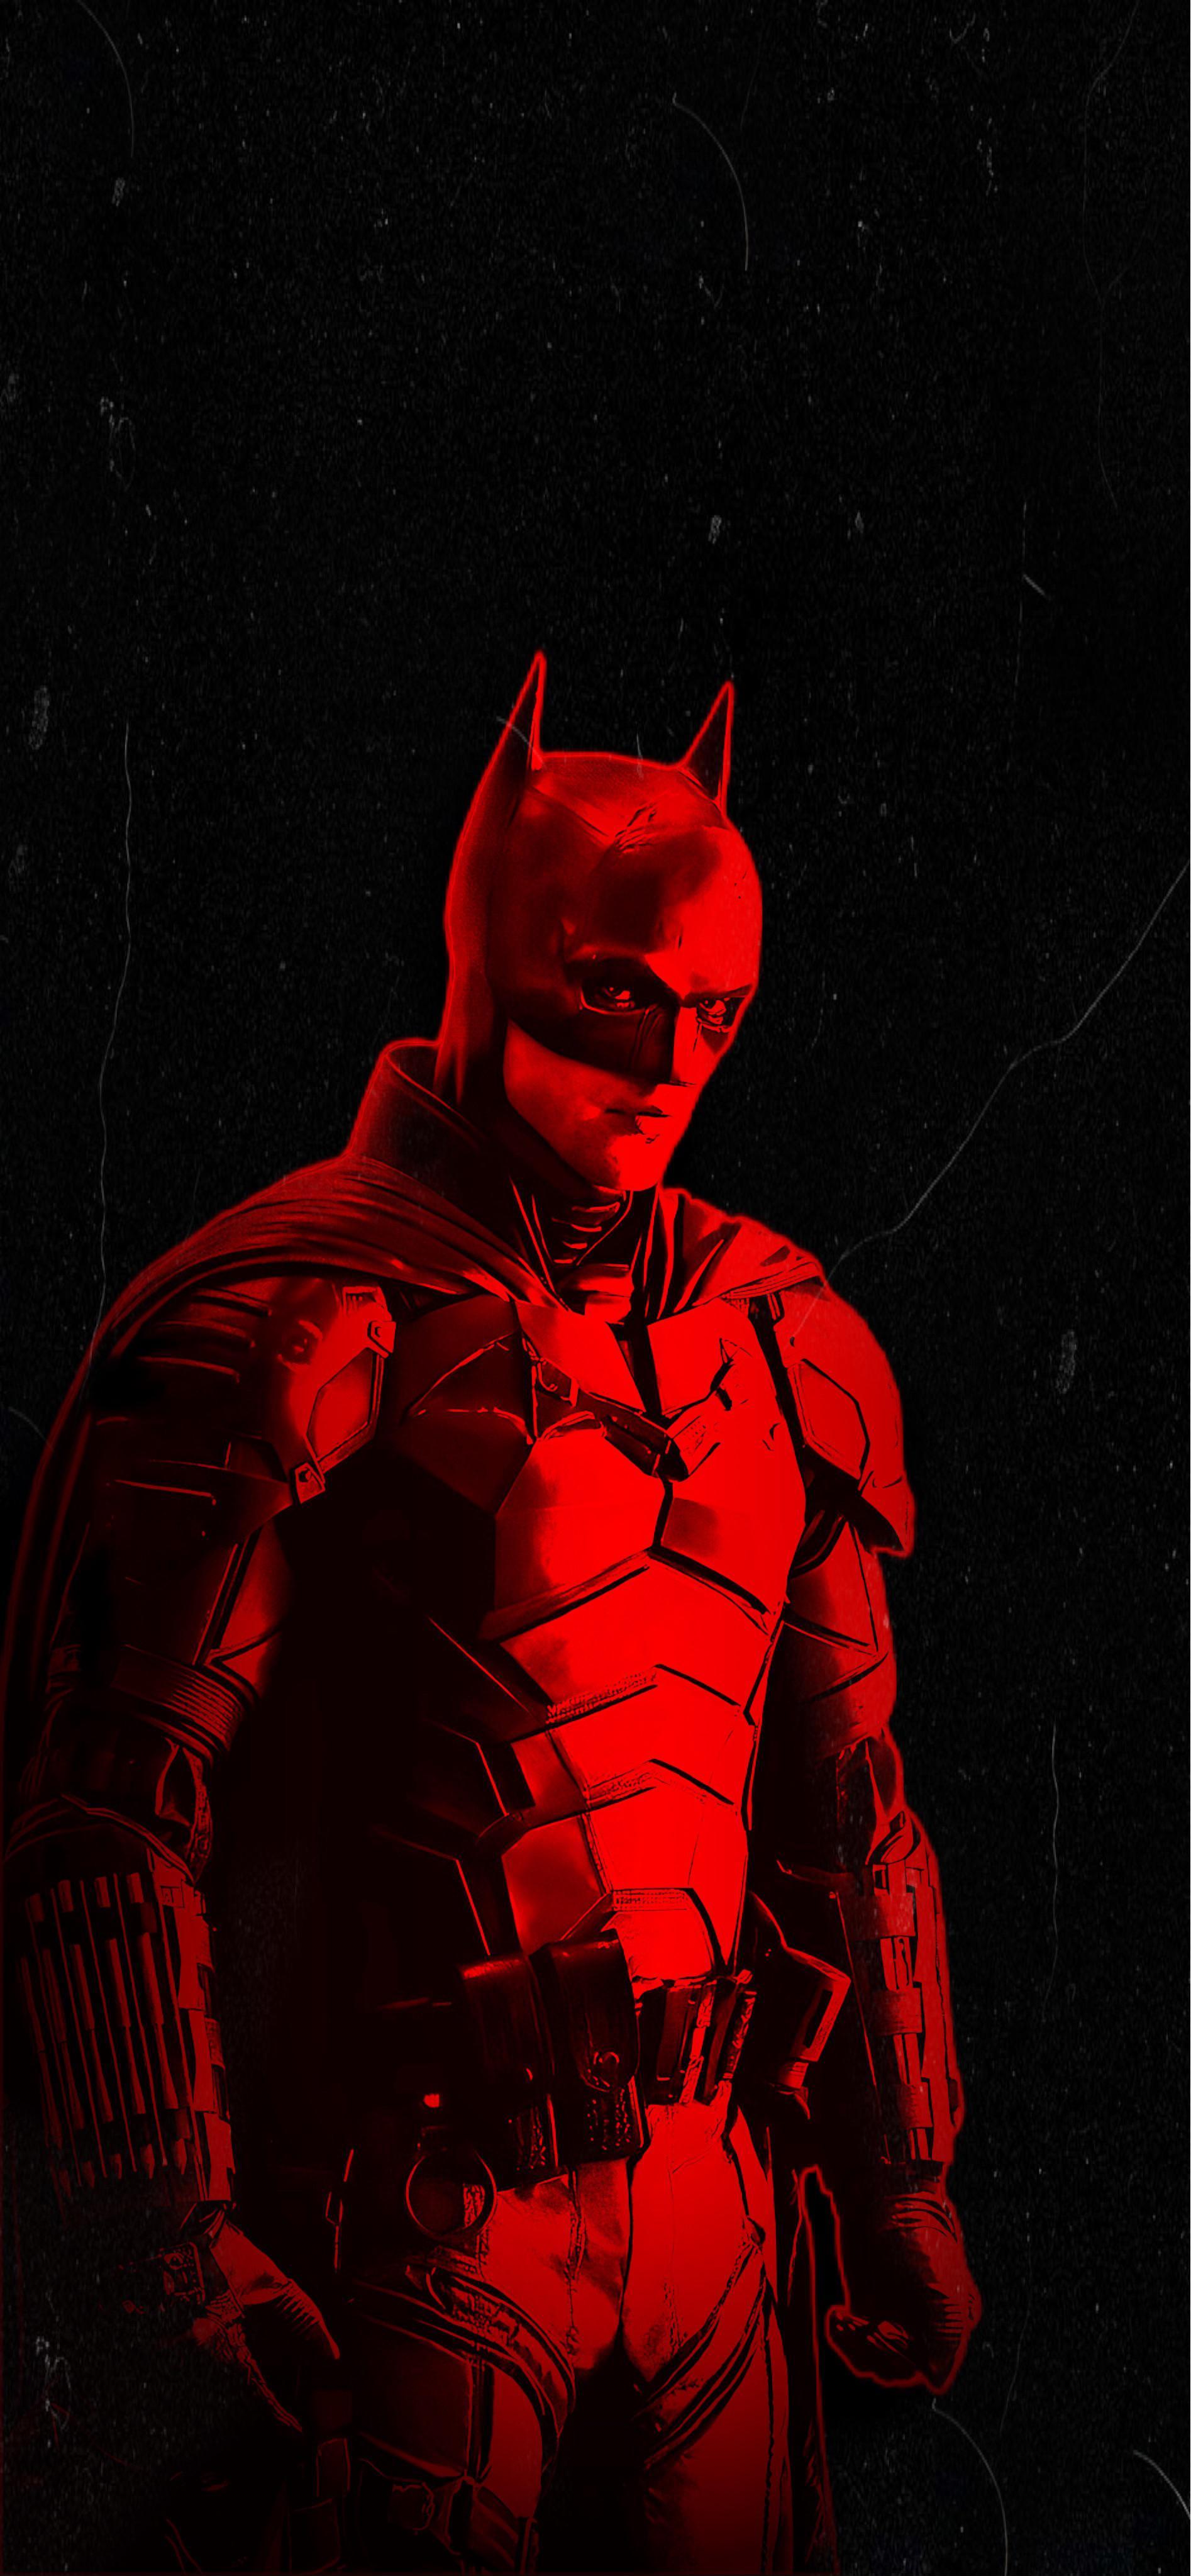 Heres some Batman wallpapers I made for IOS rTheBatmanFilm